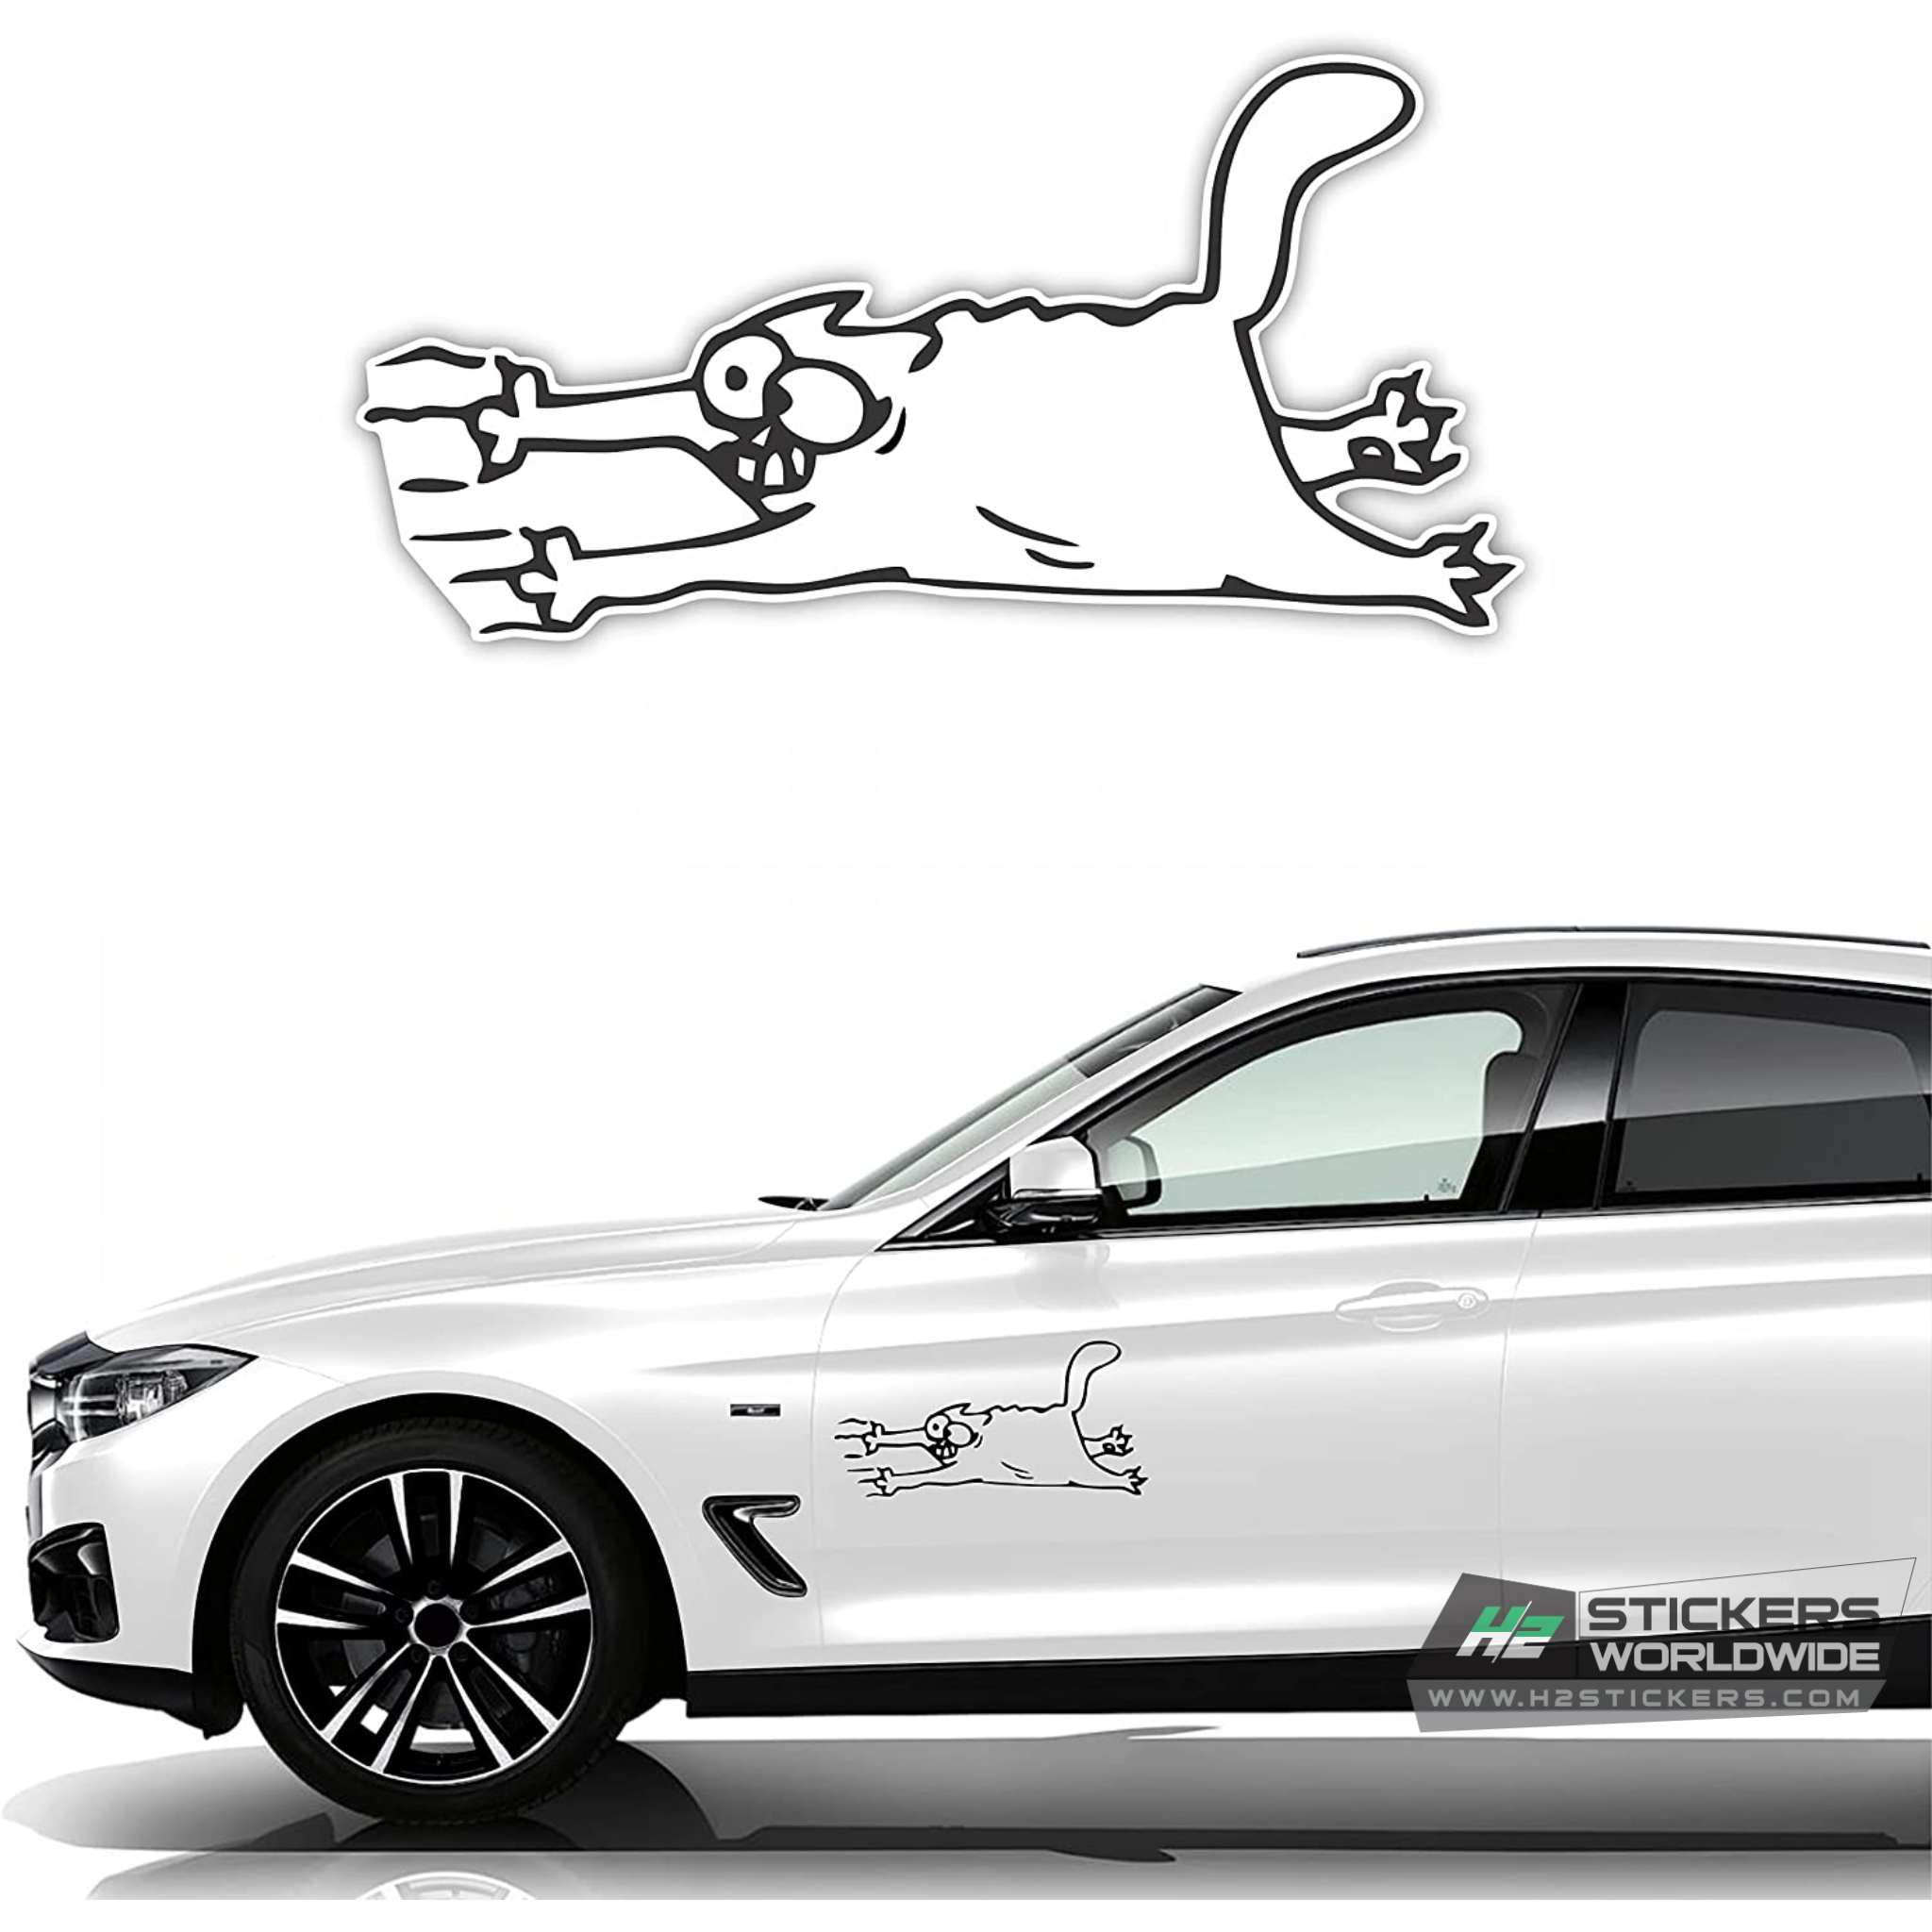 Scratch cat stickers for car  Funny sticker decal for Fords, BMW, Che – H2  Stickers - Worldwide